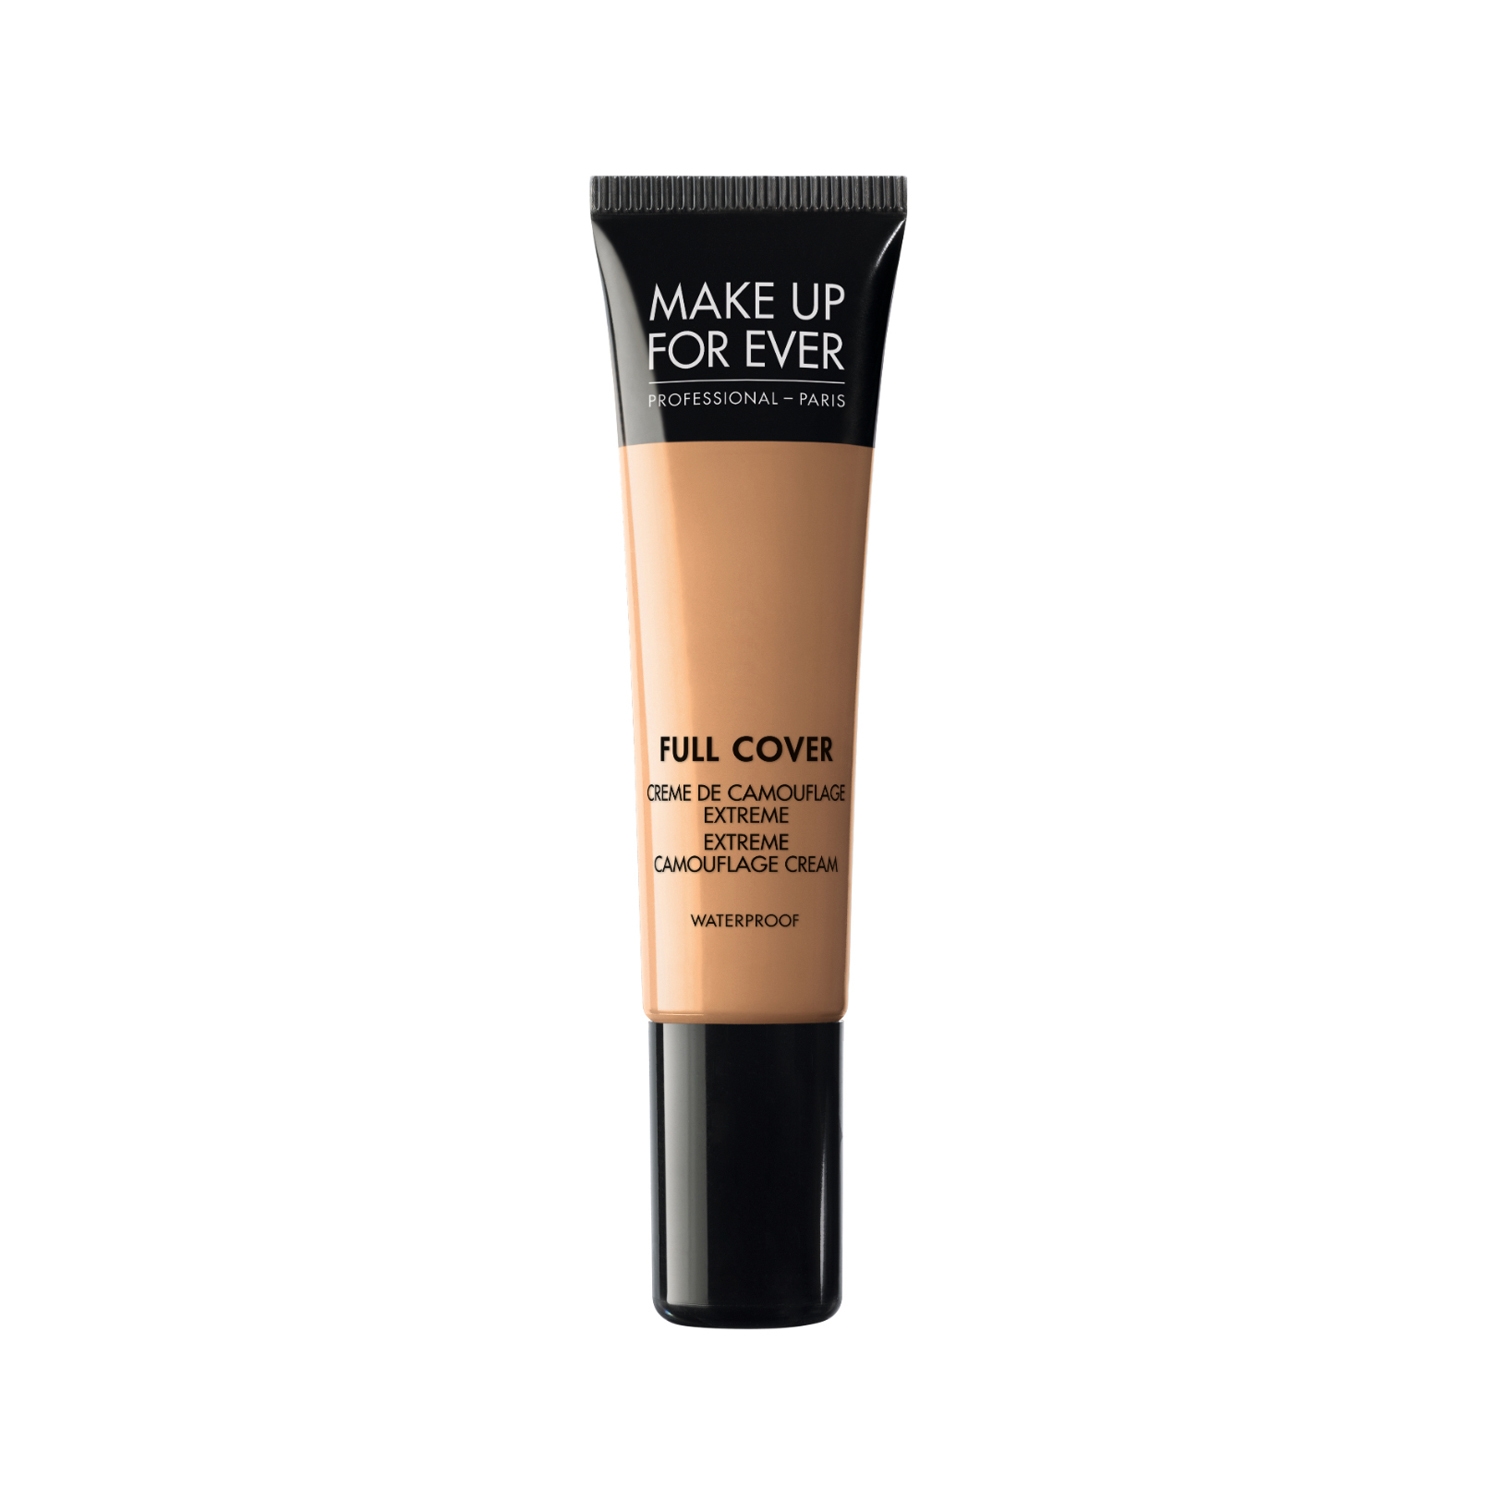 Make Up For Ever | Make Up For Ever Full Cover Extreme Camouflage Cream 12 (15ml)